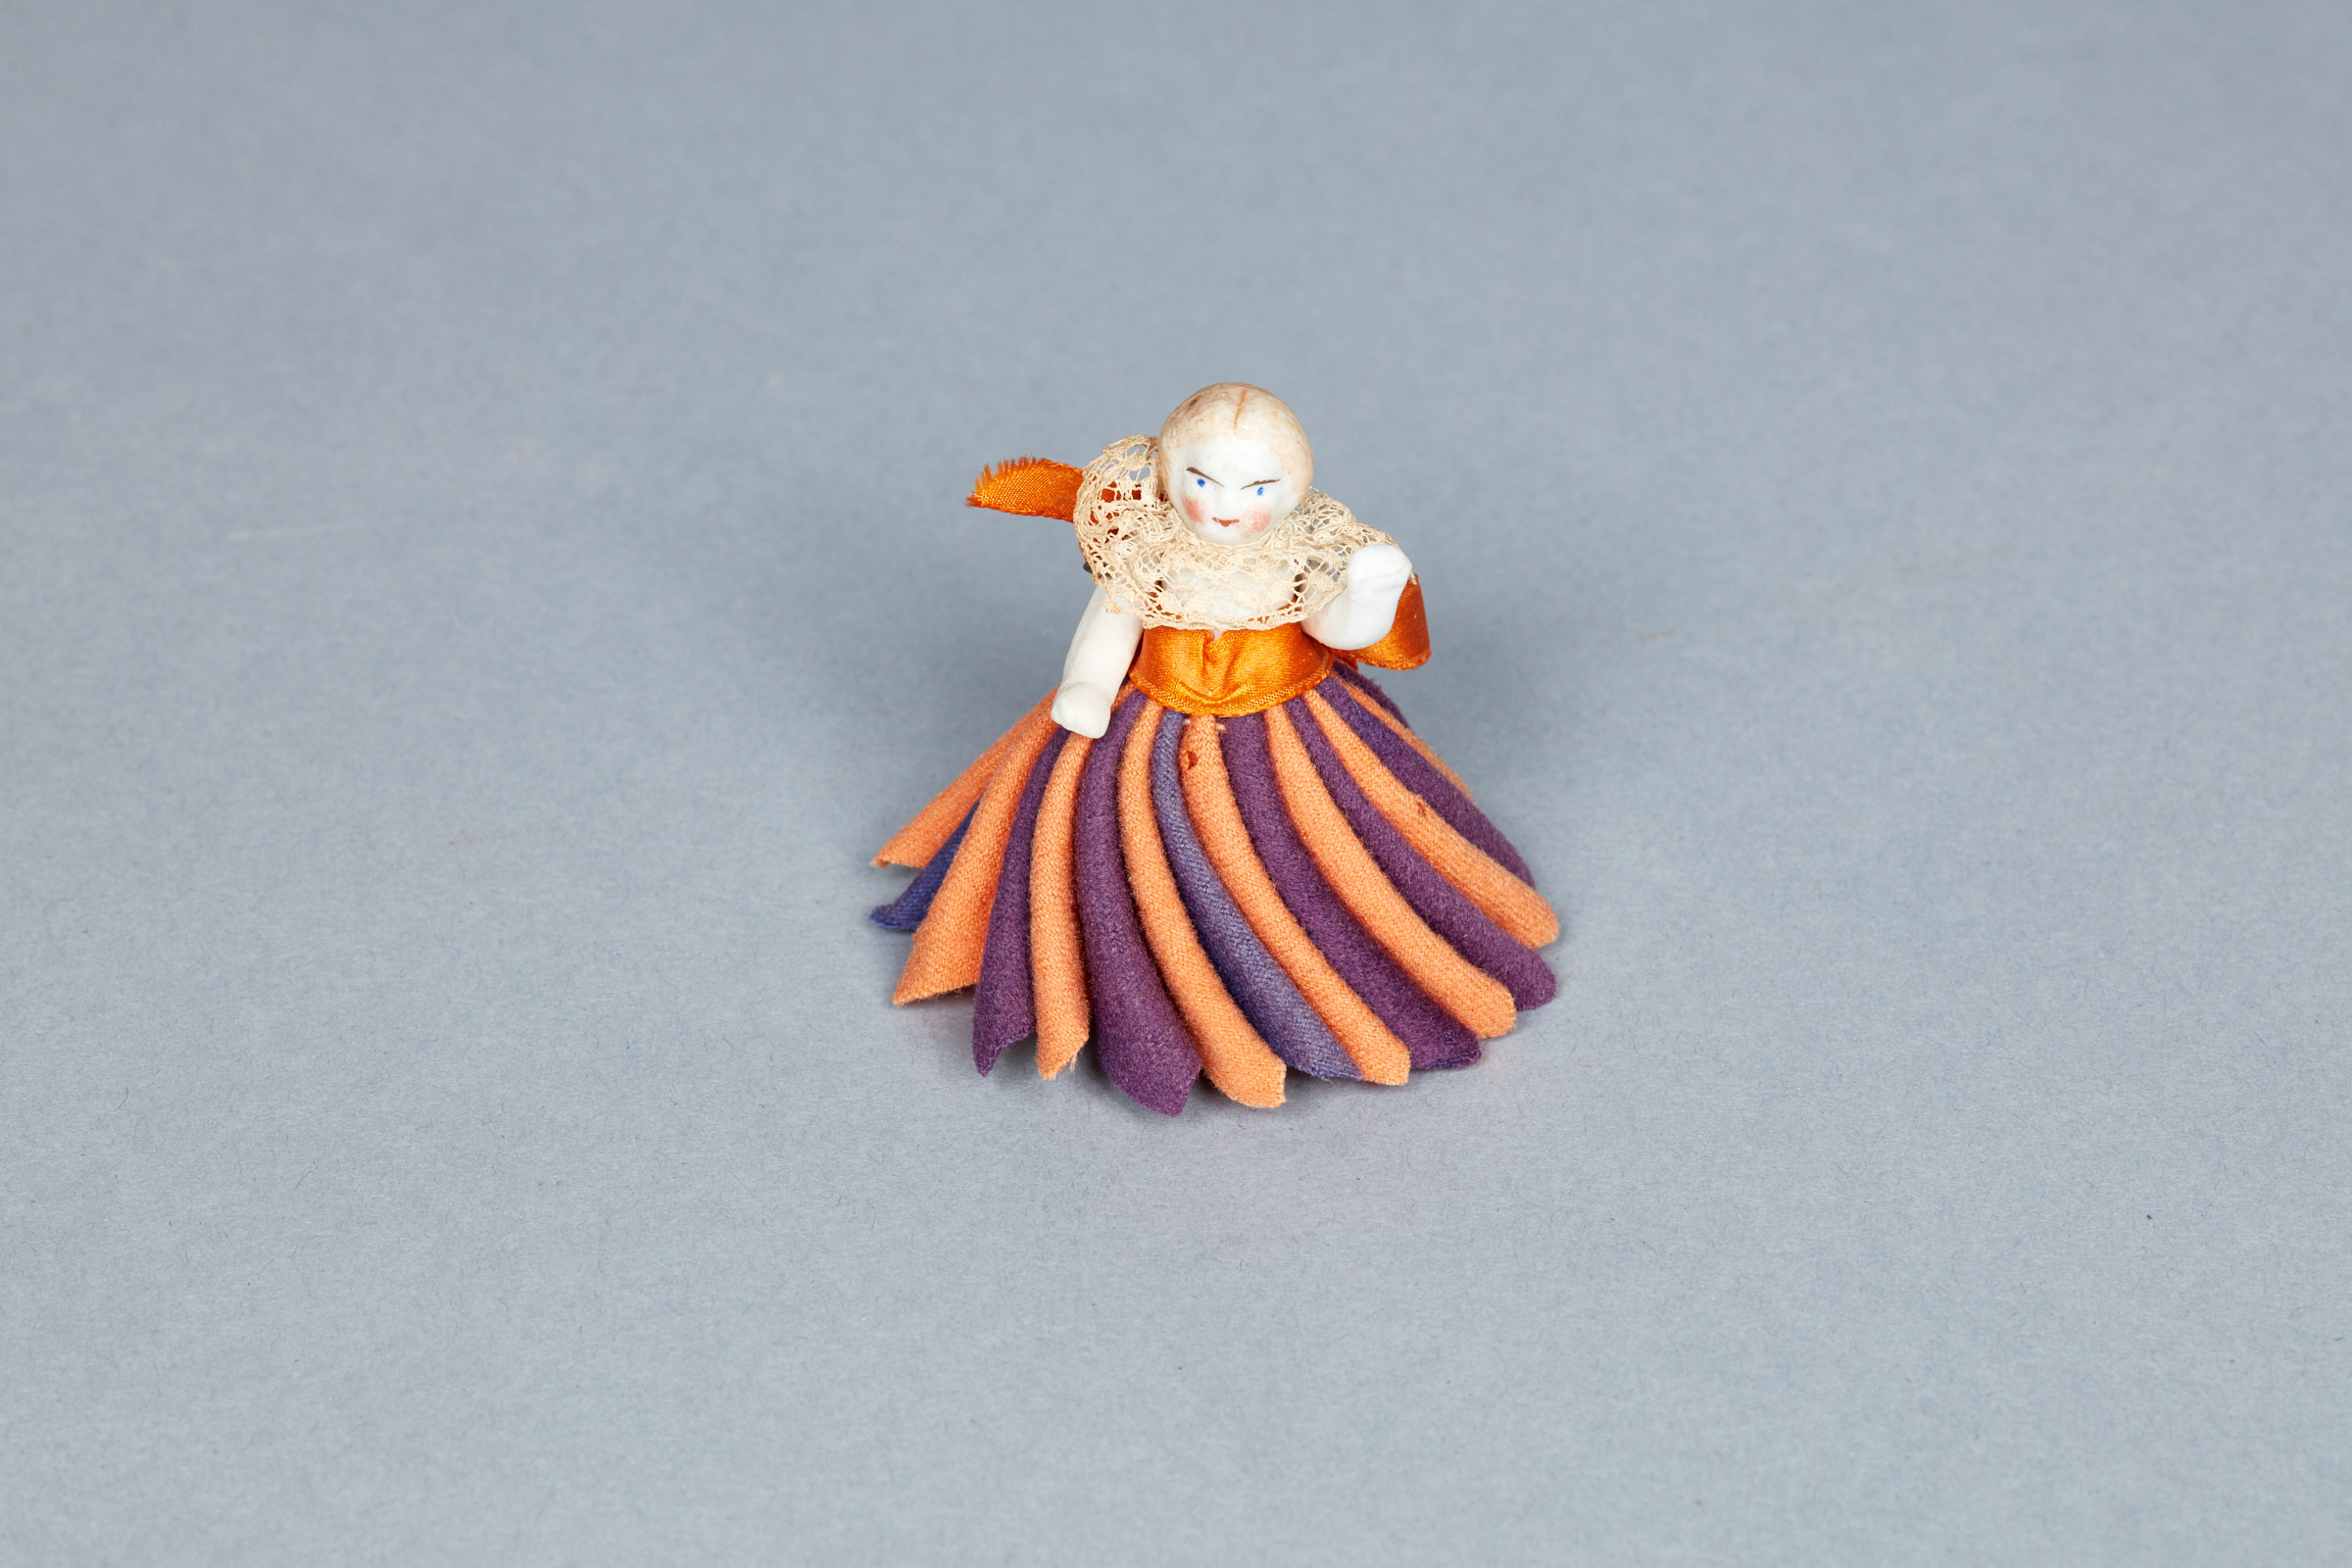 A figurine of a woman in an orange and purple dress.